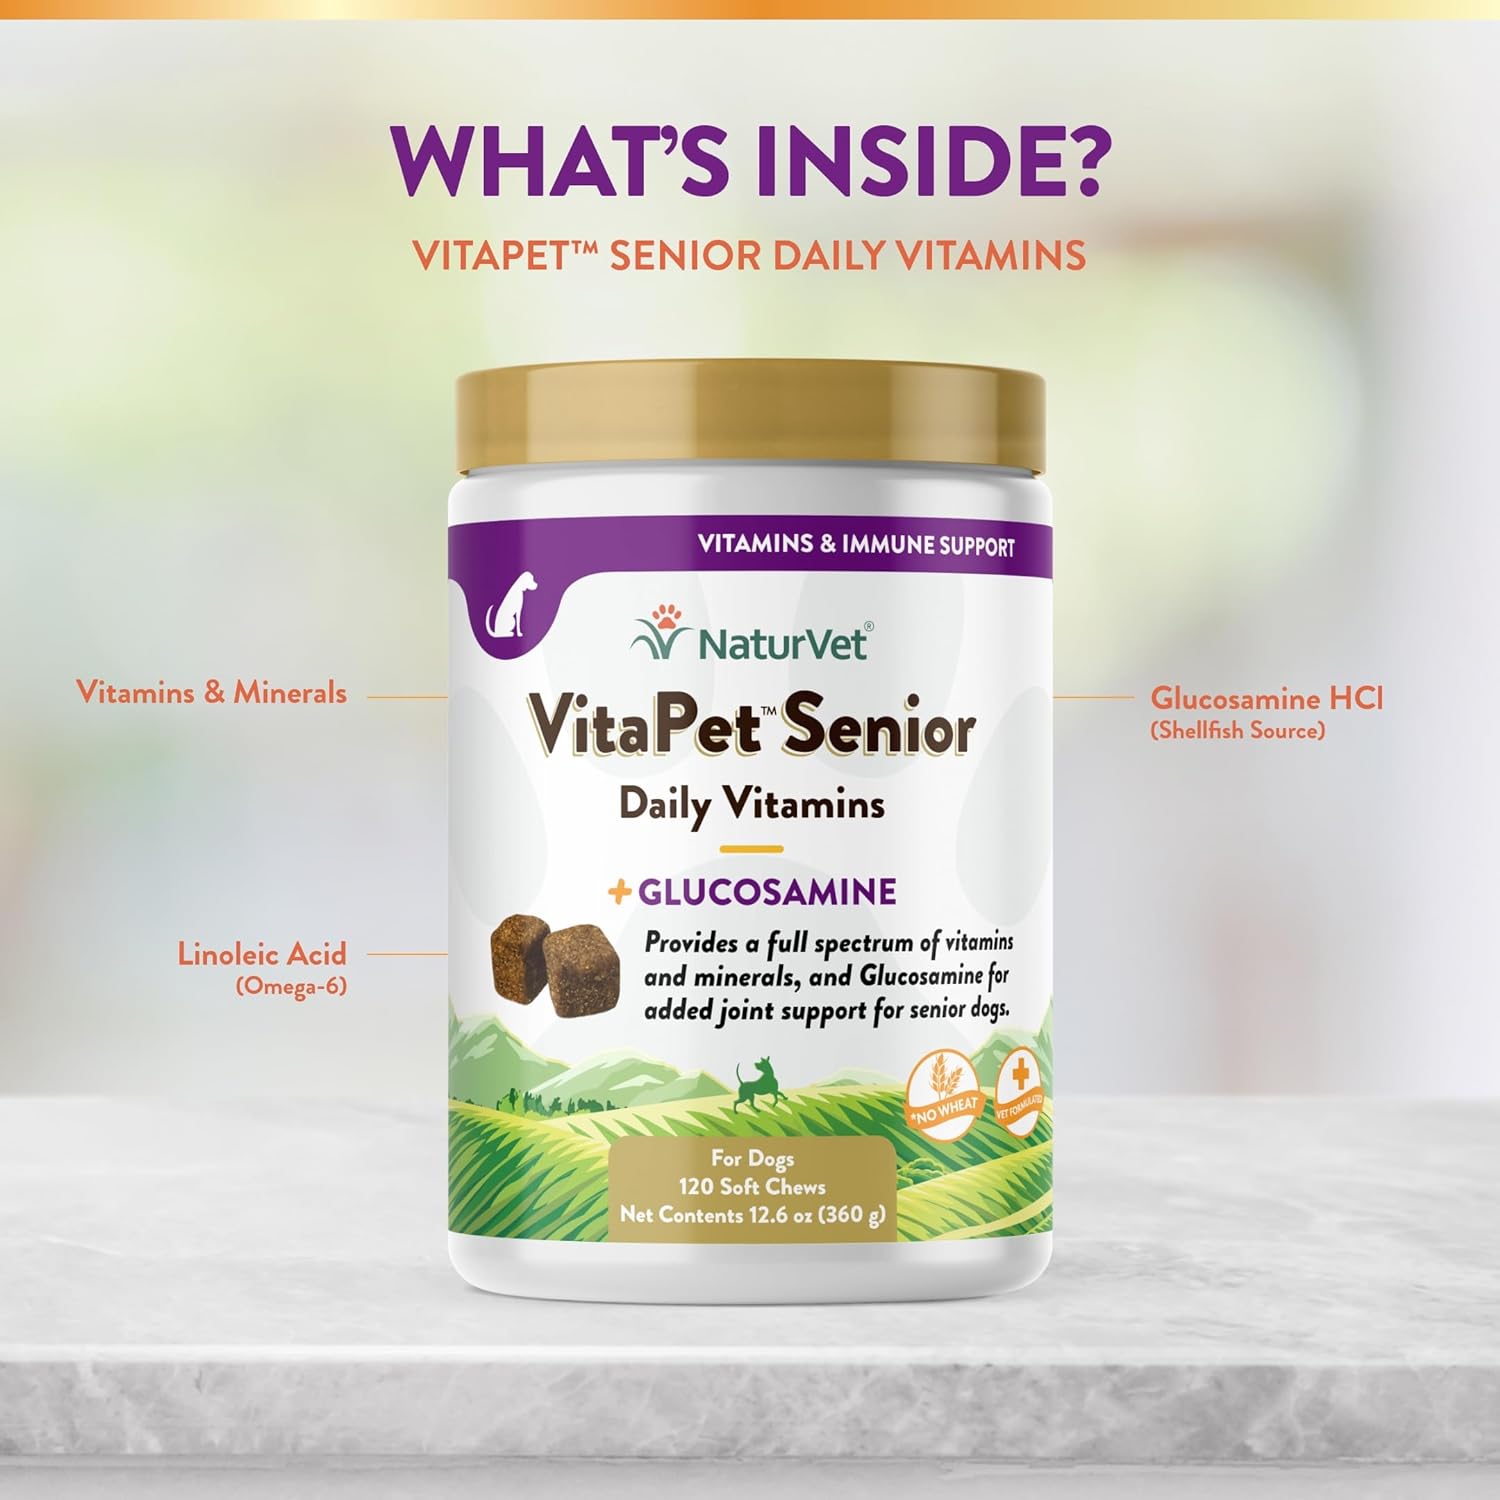 NaturVet VitaPet Senior Daily Vitamin Dog Supplements Plus Glucosamine – Includes Full-Spectrum Vitamins, Minerals – Joint Support for Older, Active Dogs – 120 Ct. Soft Chews : Pet Supplies